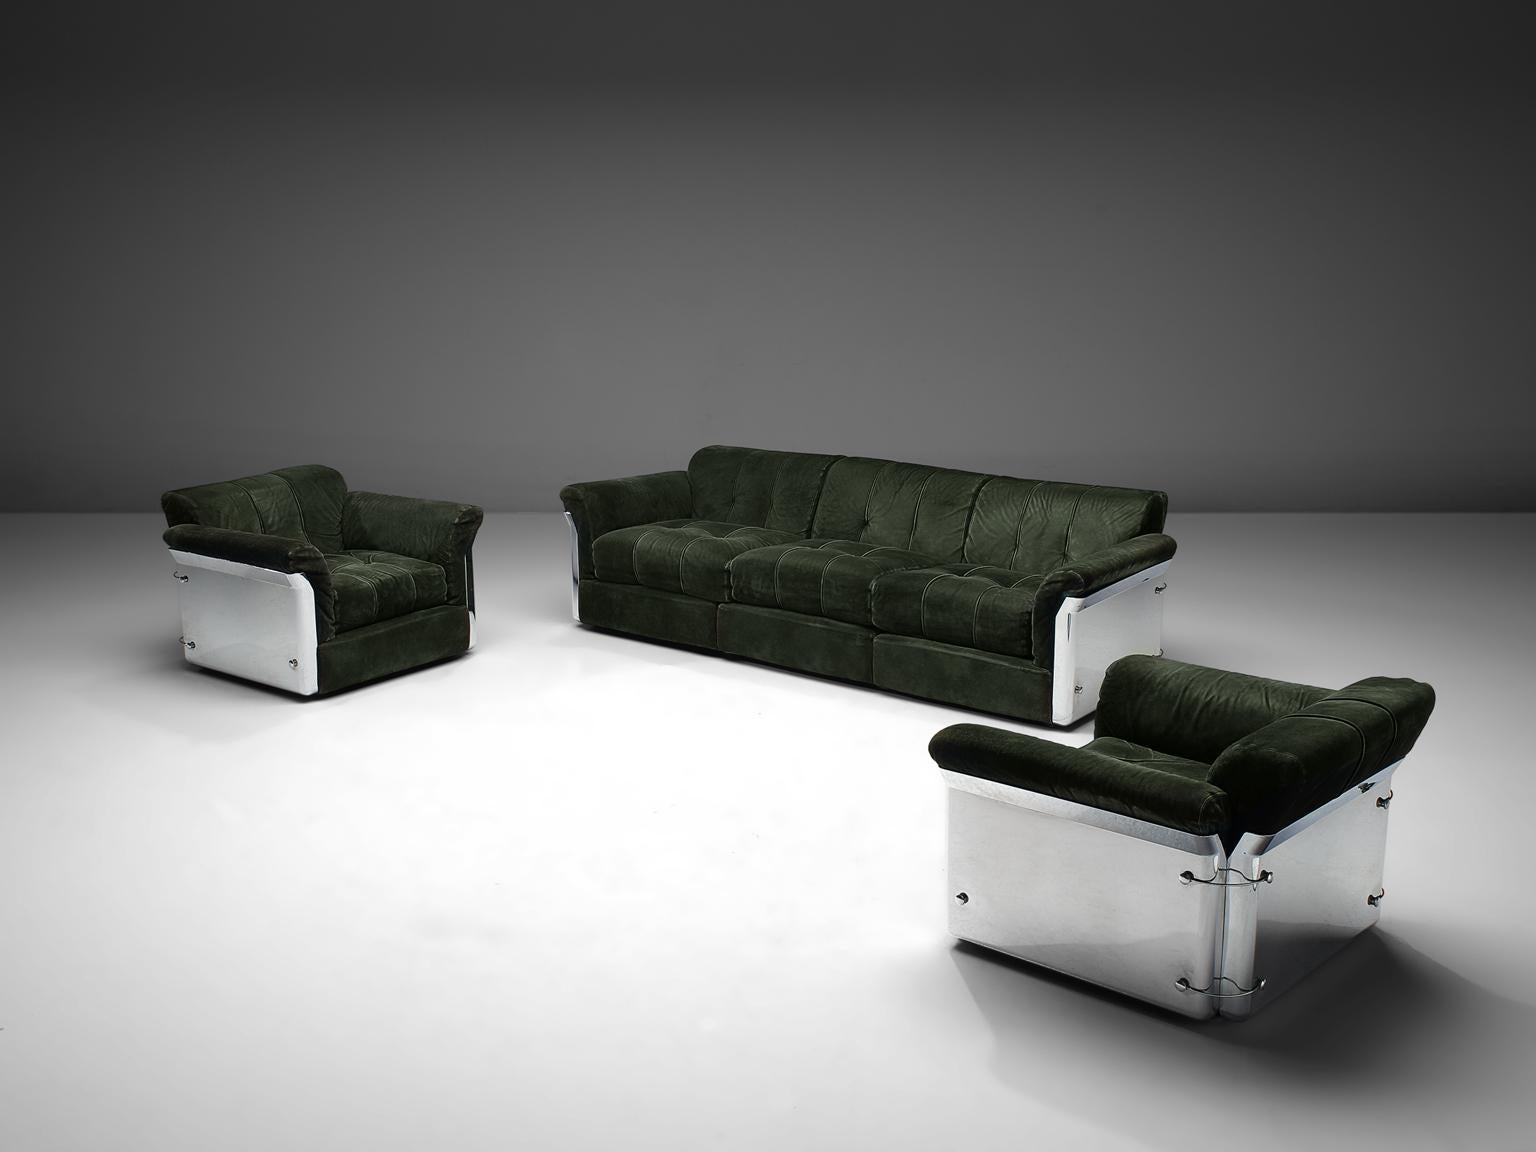 Vittorio Introini for Saporiti, three-seat sofa and two lounge chaird, navy suede fabric and chrome, Italy, 1969.

This living room set s is designed by Vittorio Introini and produced by Saporiti in chrome and dark green upholstery. The pieces